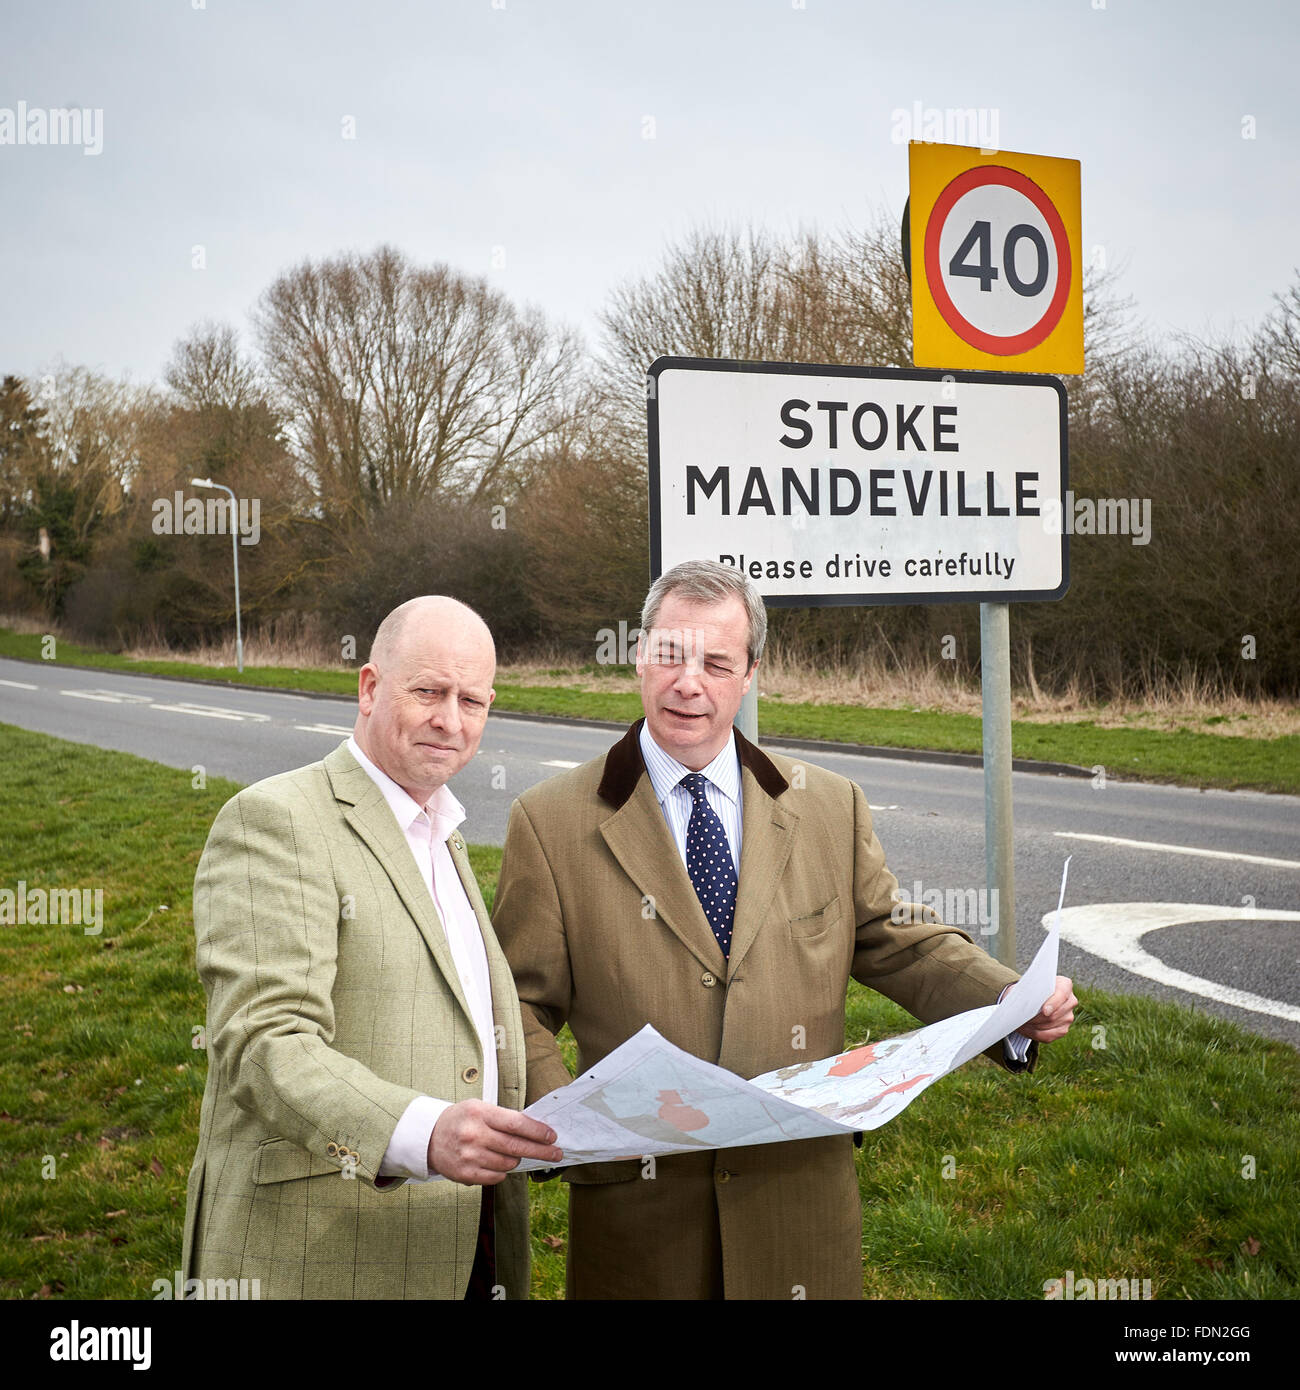 UKIP party leader Nigel Farage (R) pictured where HS2 will cross a major road in Stoke Mandeville with Chris Adams (L) Stock Photo